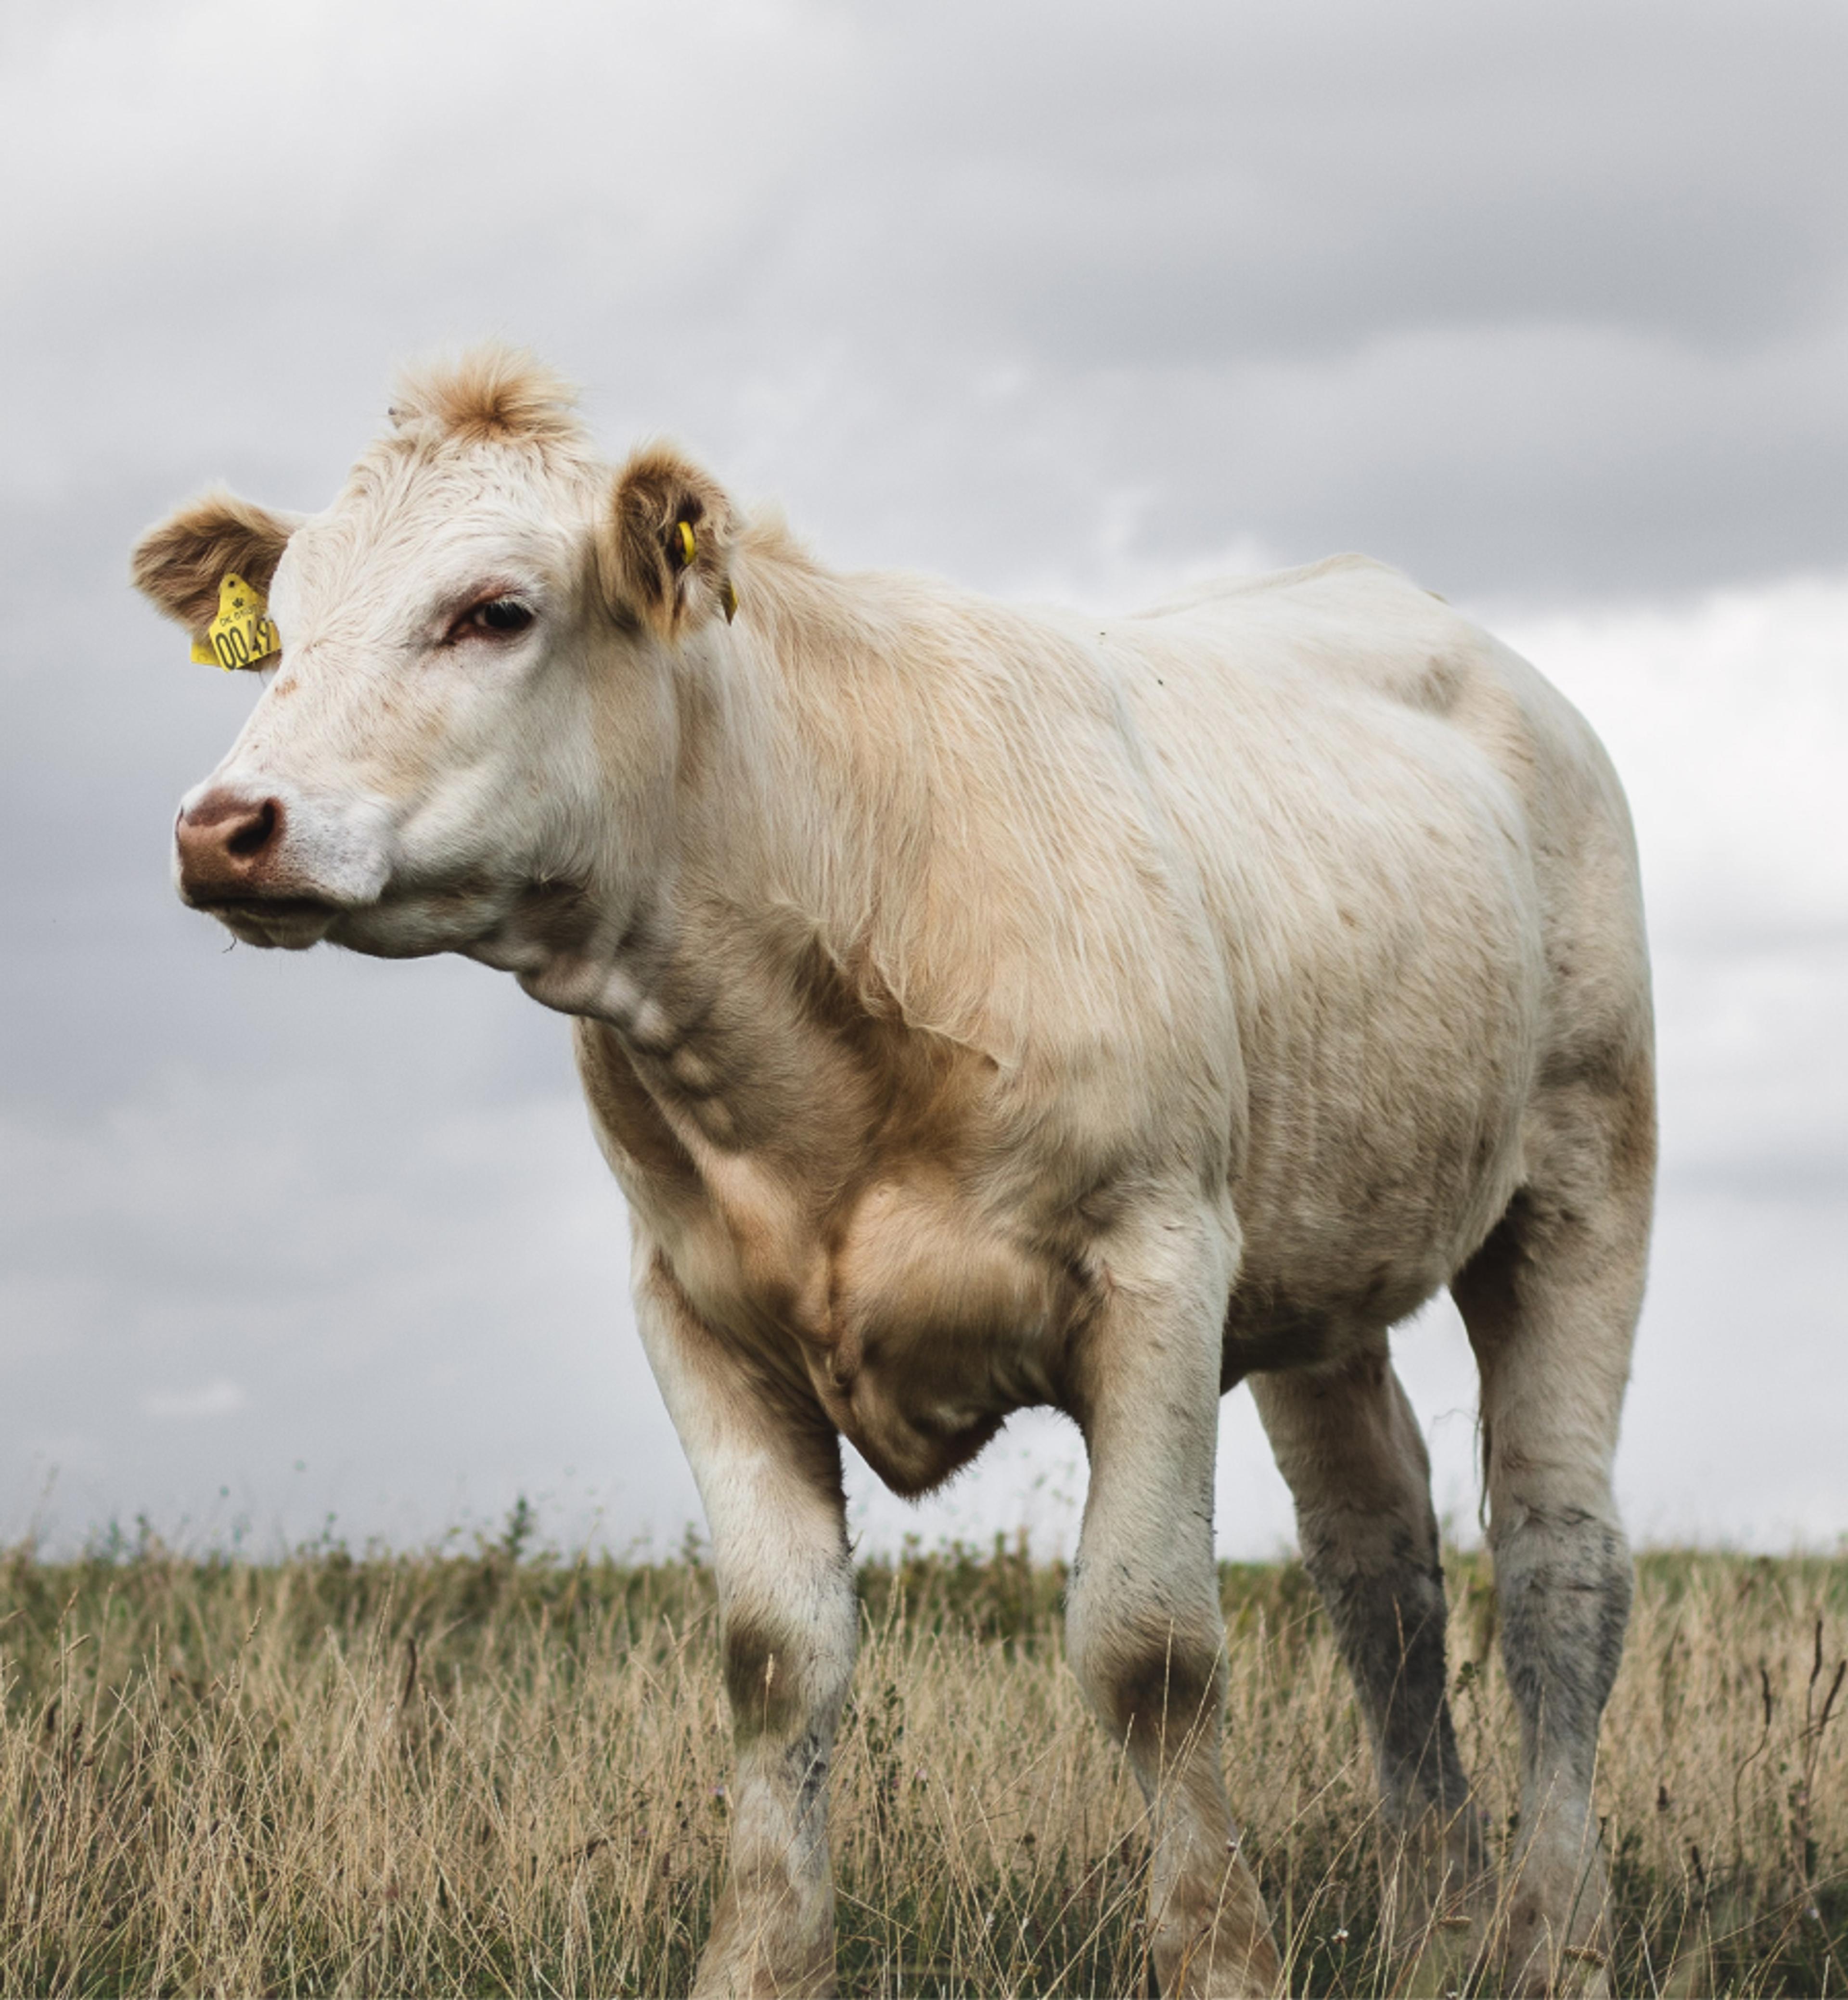 A white cow in a paddock.